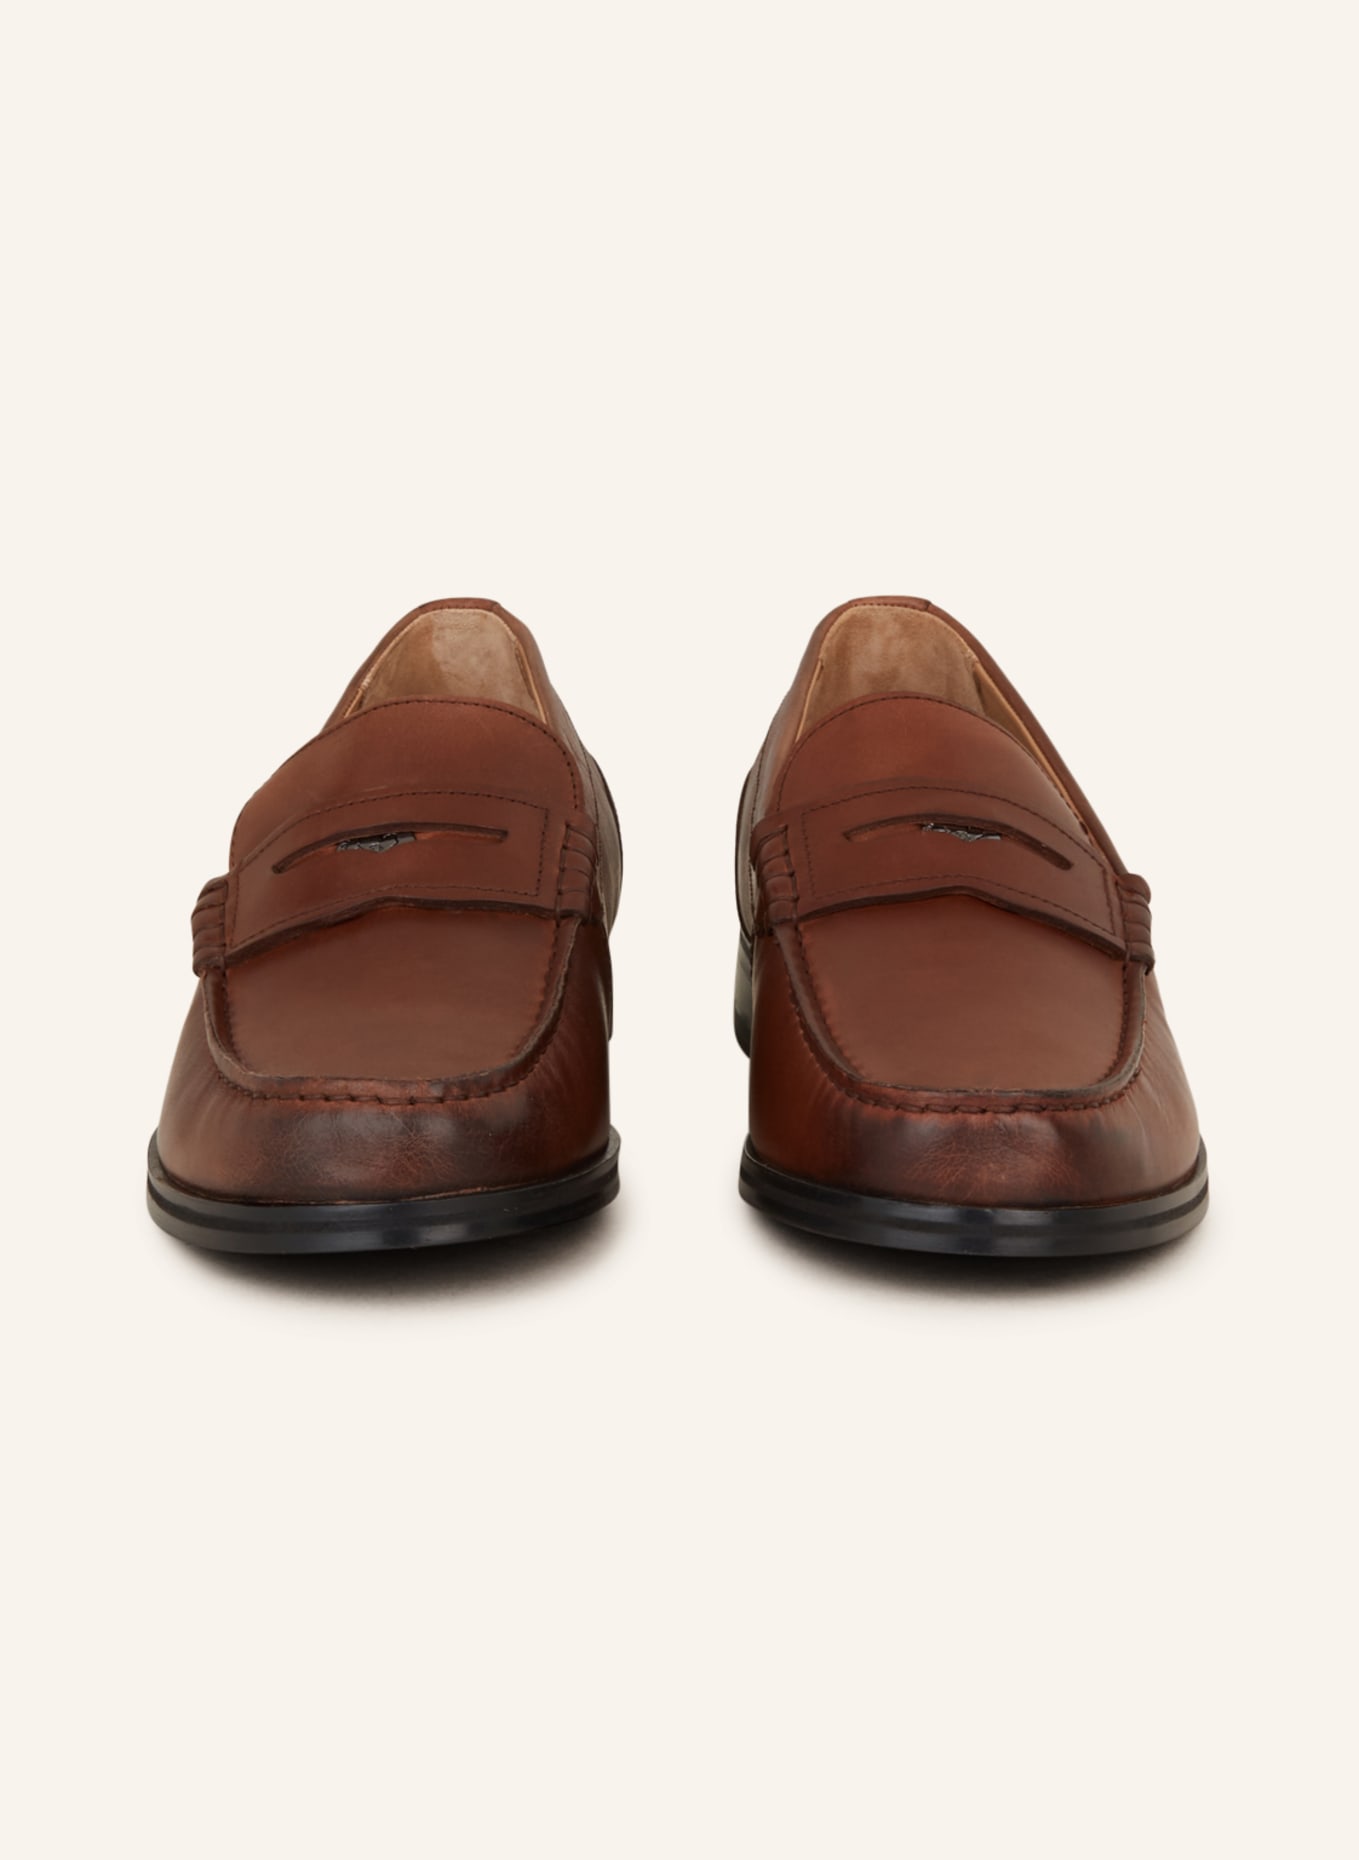 TED BAKER Penny-Loafer TIRYMEW, Farbe: BRAUN (Bild 3)